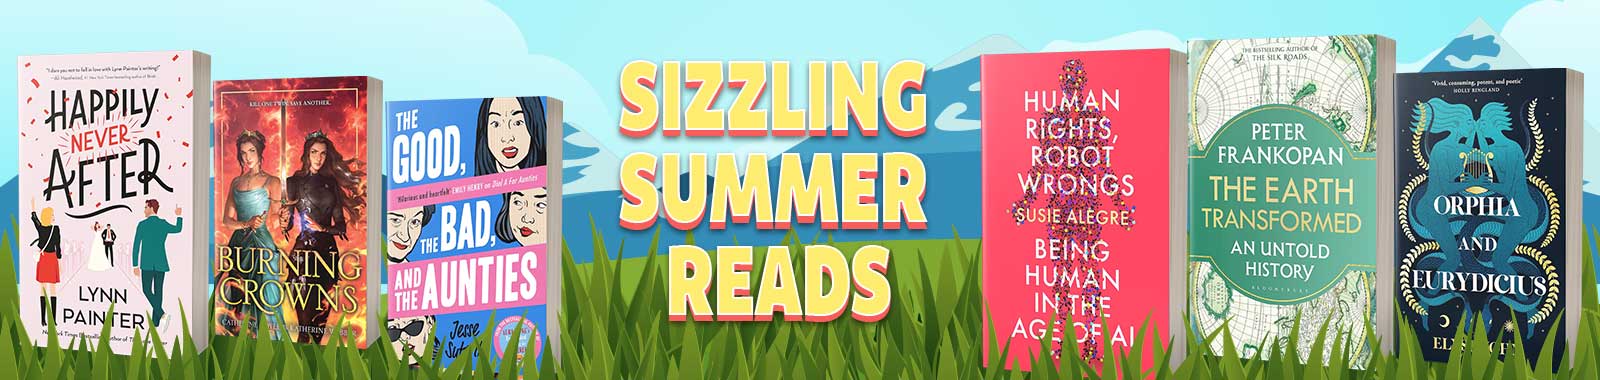 Sizzling summer reads